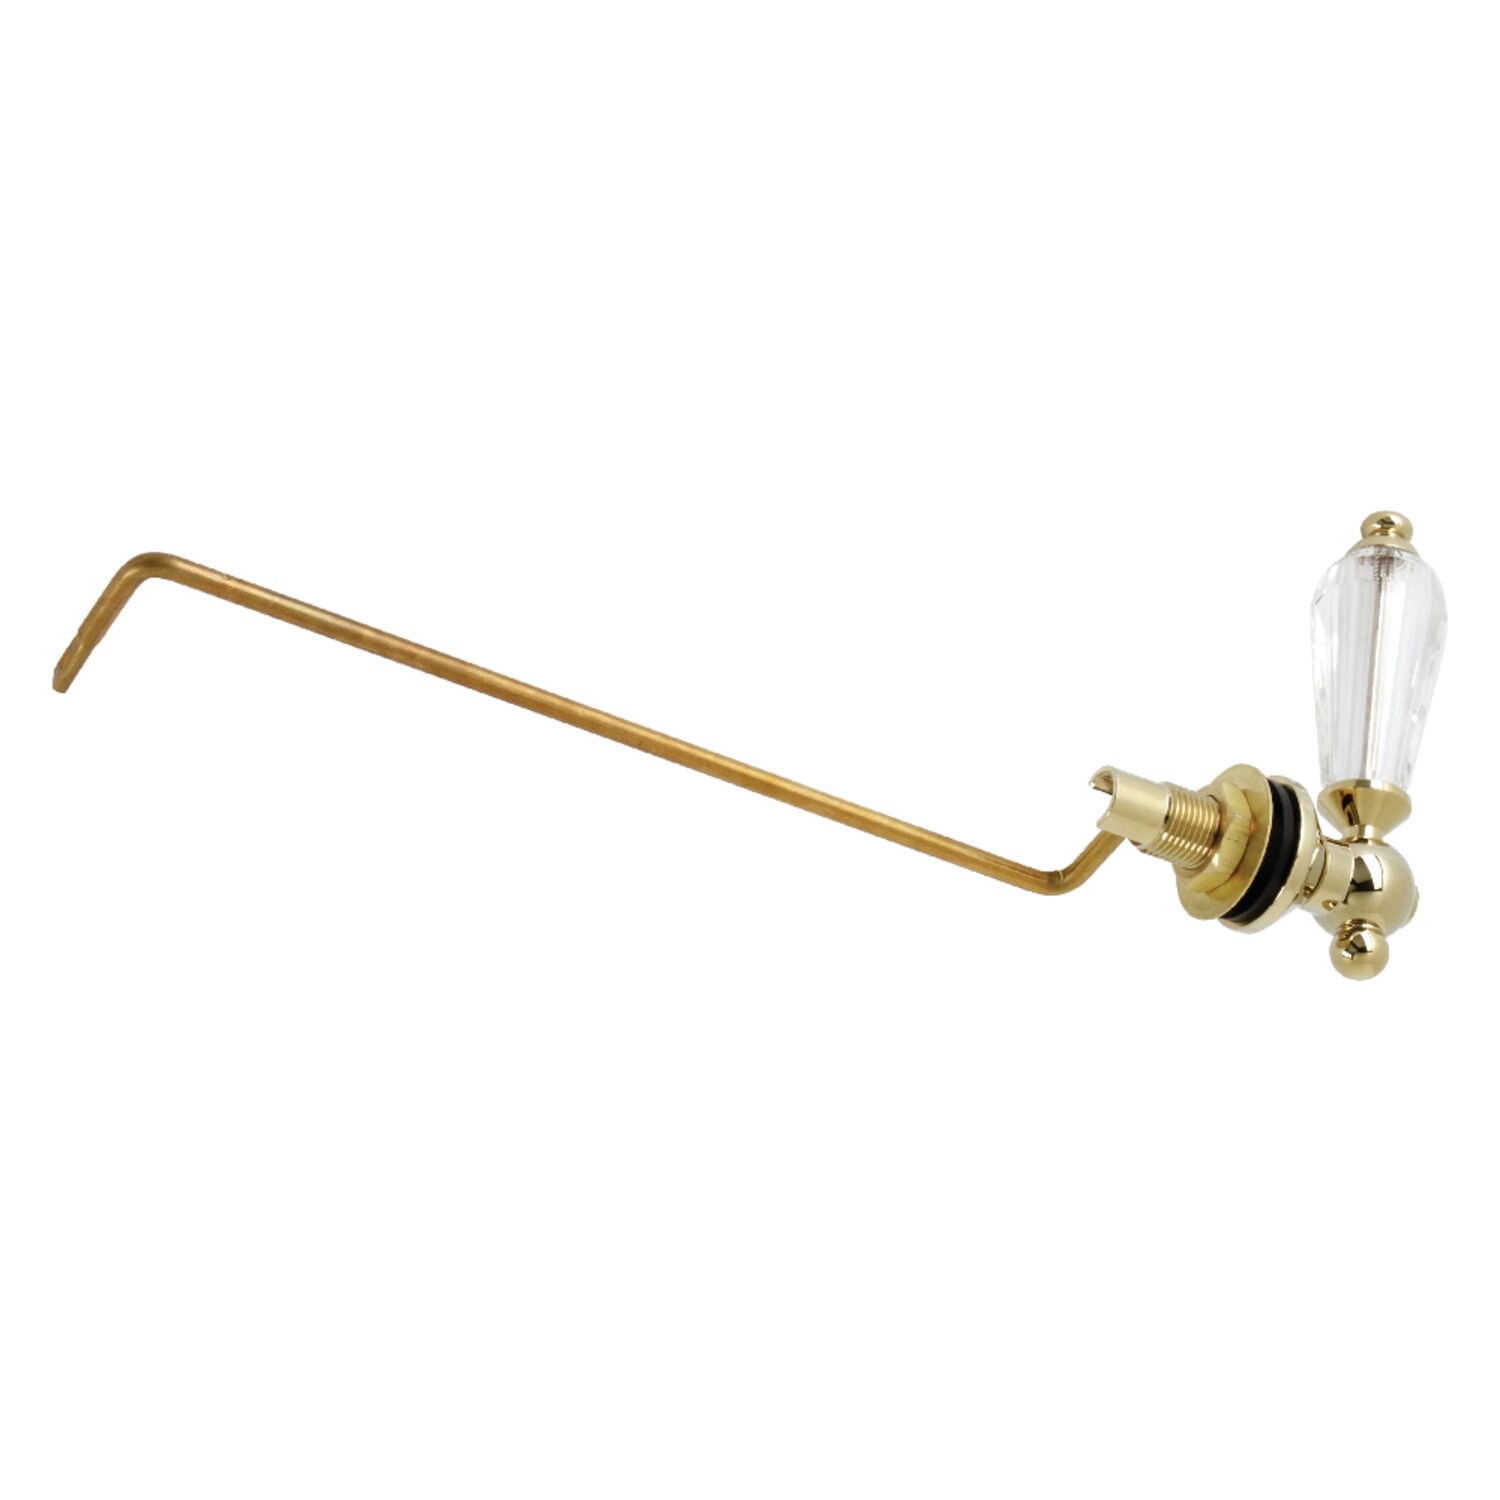 Jones Stephens Toilet Tank Trip Lever for Toto 10 Brass Arm with - Brushed Nickel